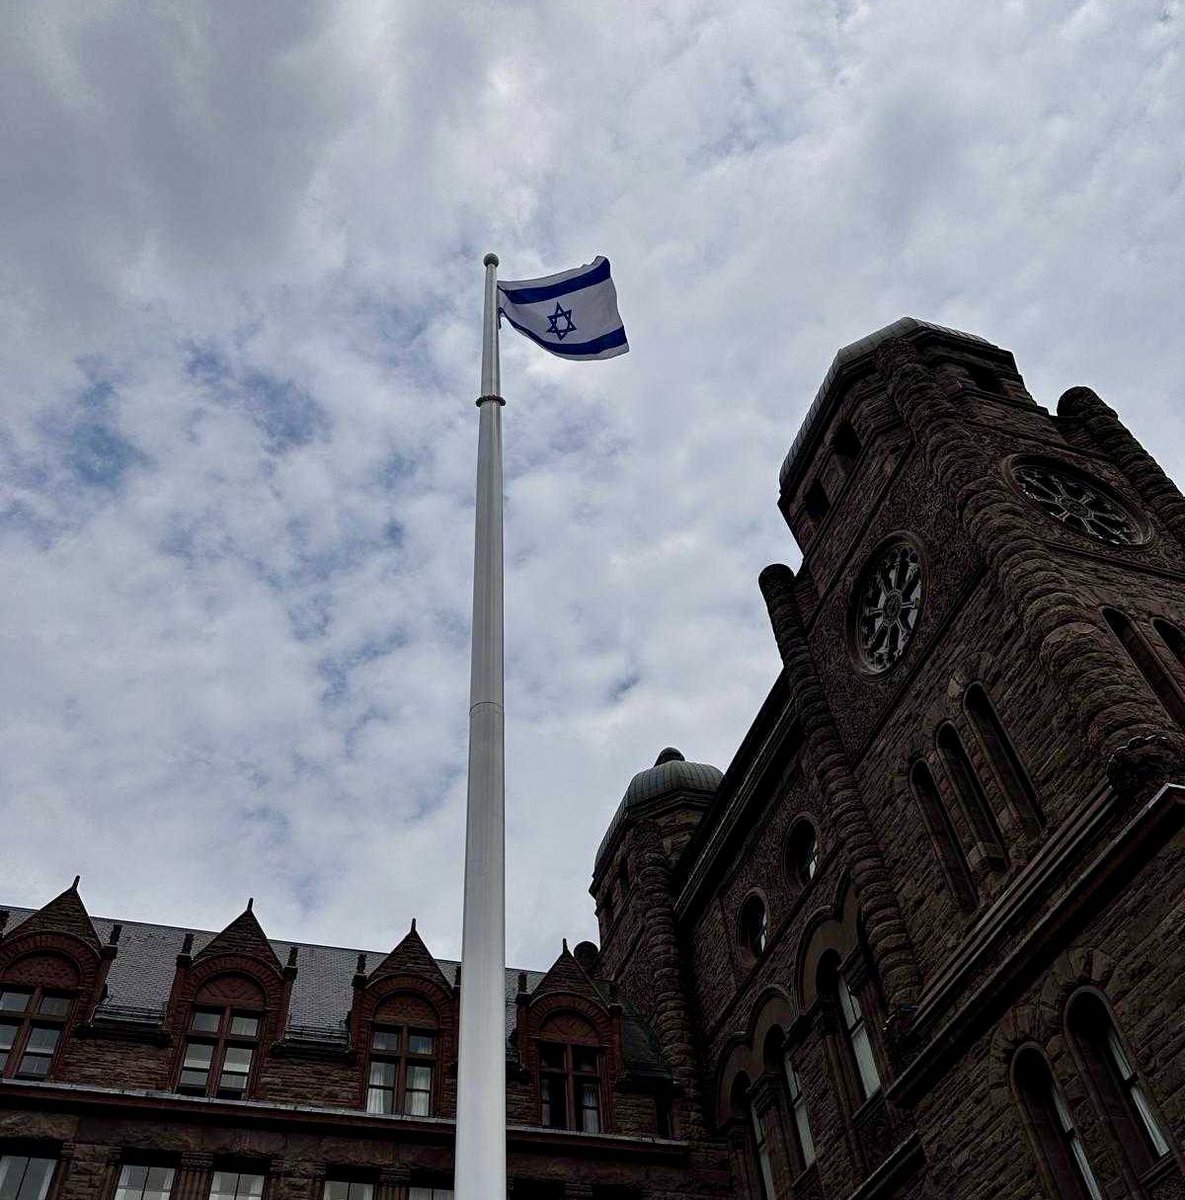 Dignitaries from all levels of government raised the flag of 🇮🇱 with us yesterday at the Ontario #Legislature, including Speaker of the Legislative Assembly, @MPPArnottWHH, Minister @MPPKerzner & MPP @StephenBlais. This year not only marks Israel’s 76th anniversary of